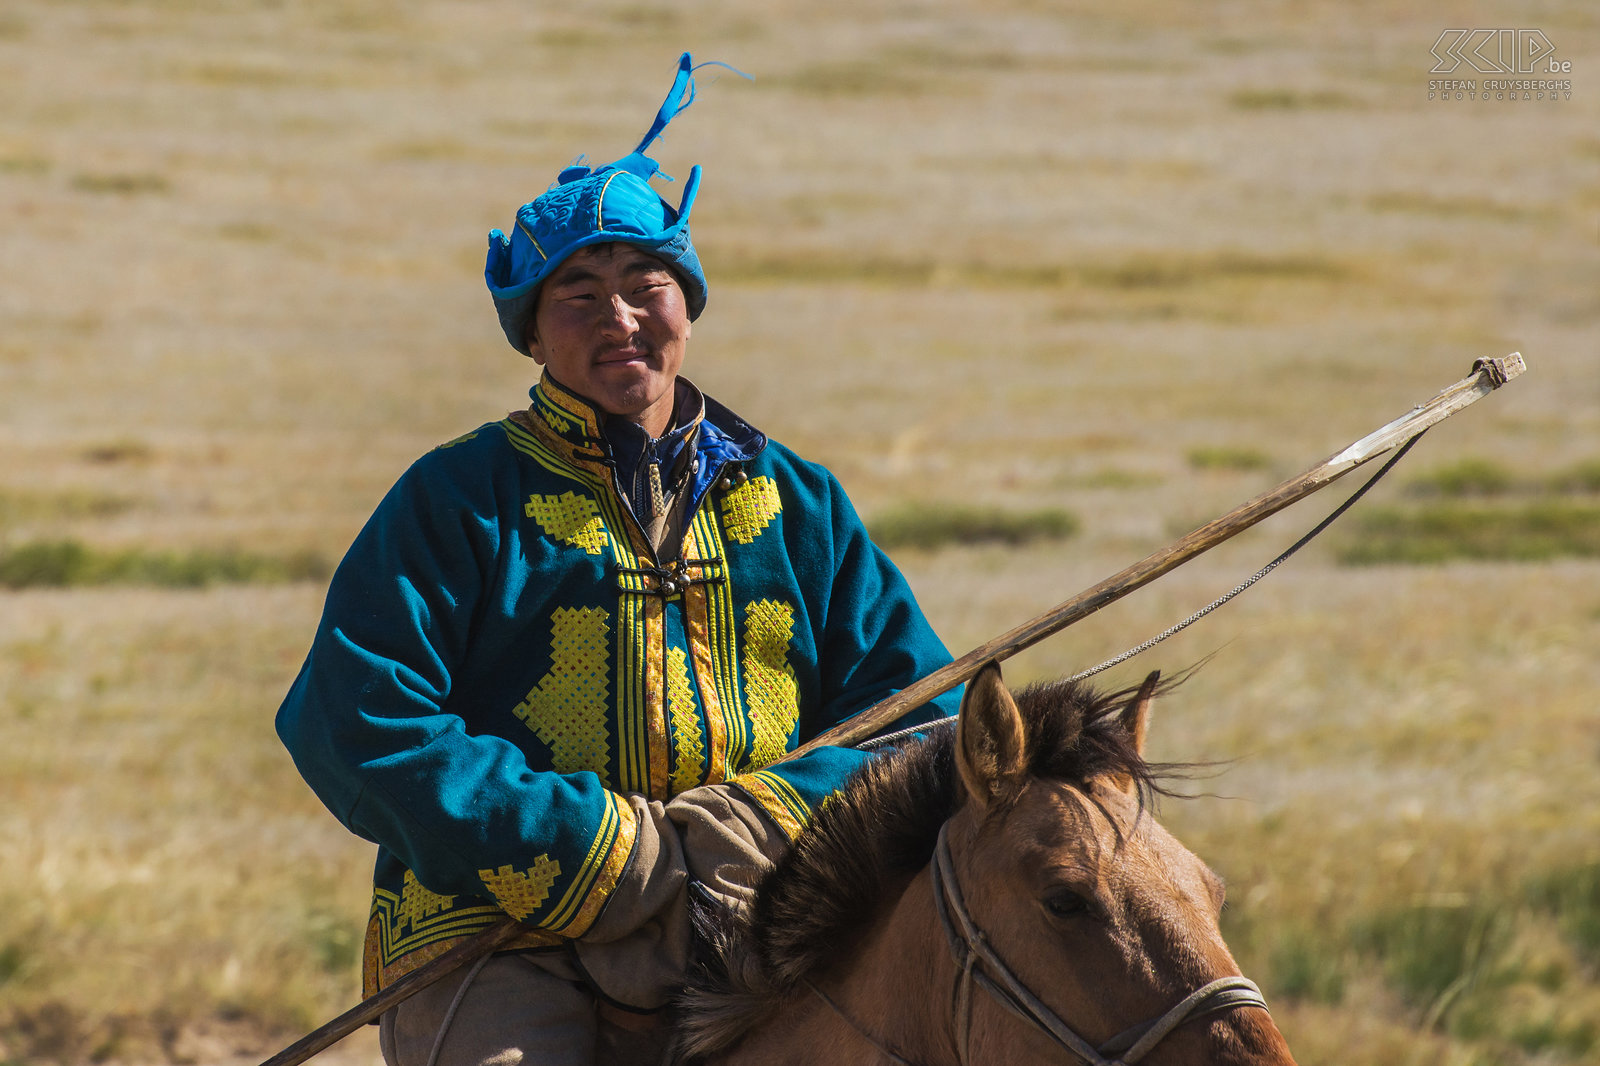 Hustai - Nomad Nomad with traditional Mongolian costume. Stefan Cruysberghs